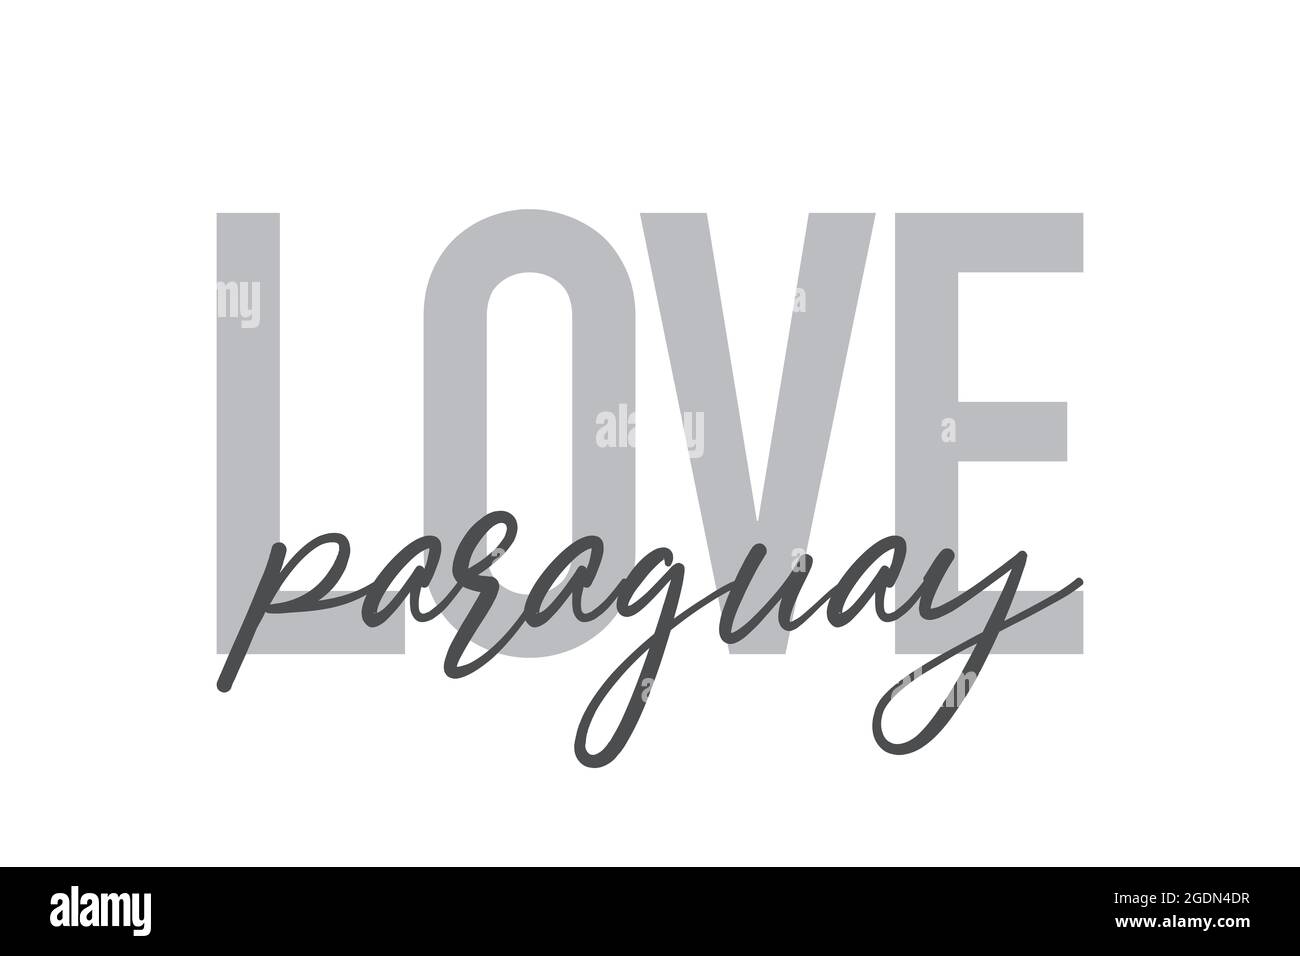 Modern, simple, minimal typographic design of a saying 'Love Paraguay' in tones of grey color. Cool, urban, trendy and playful graphic vector art with Stock Photo